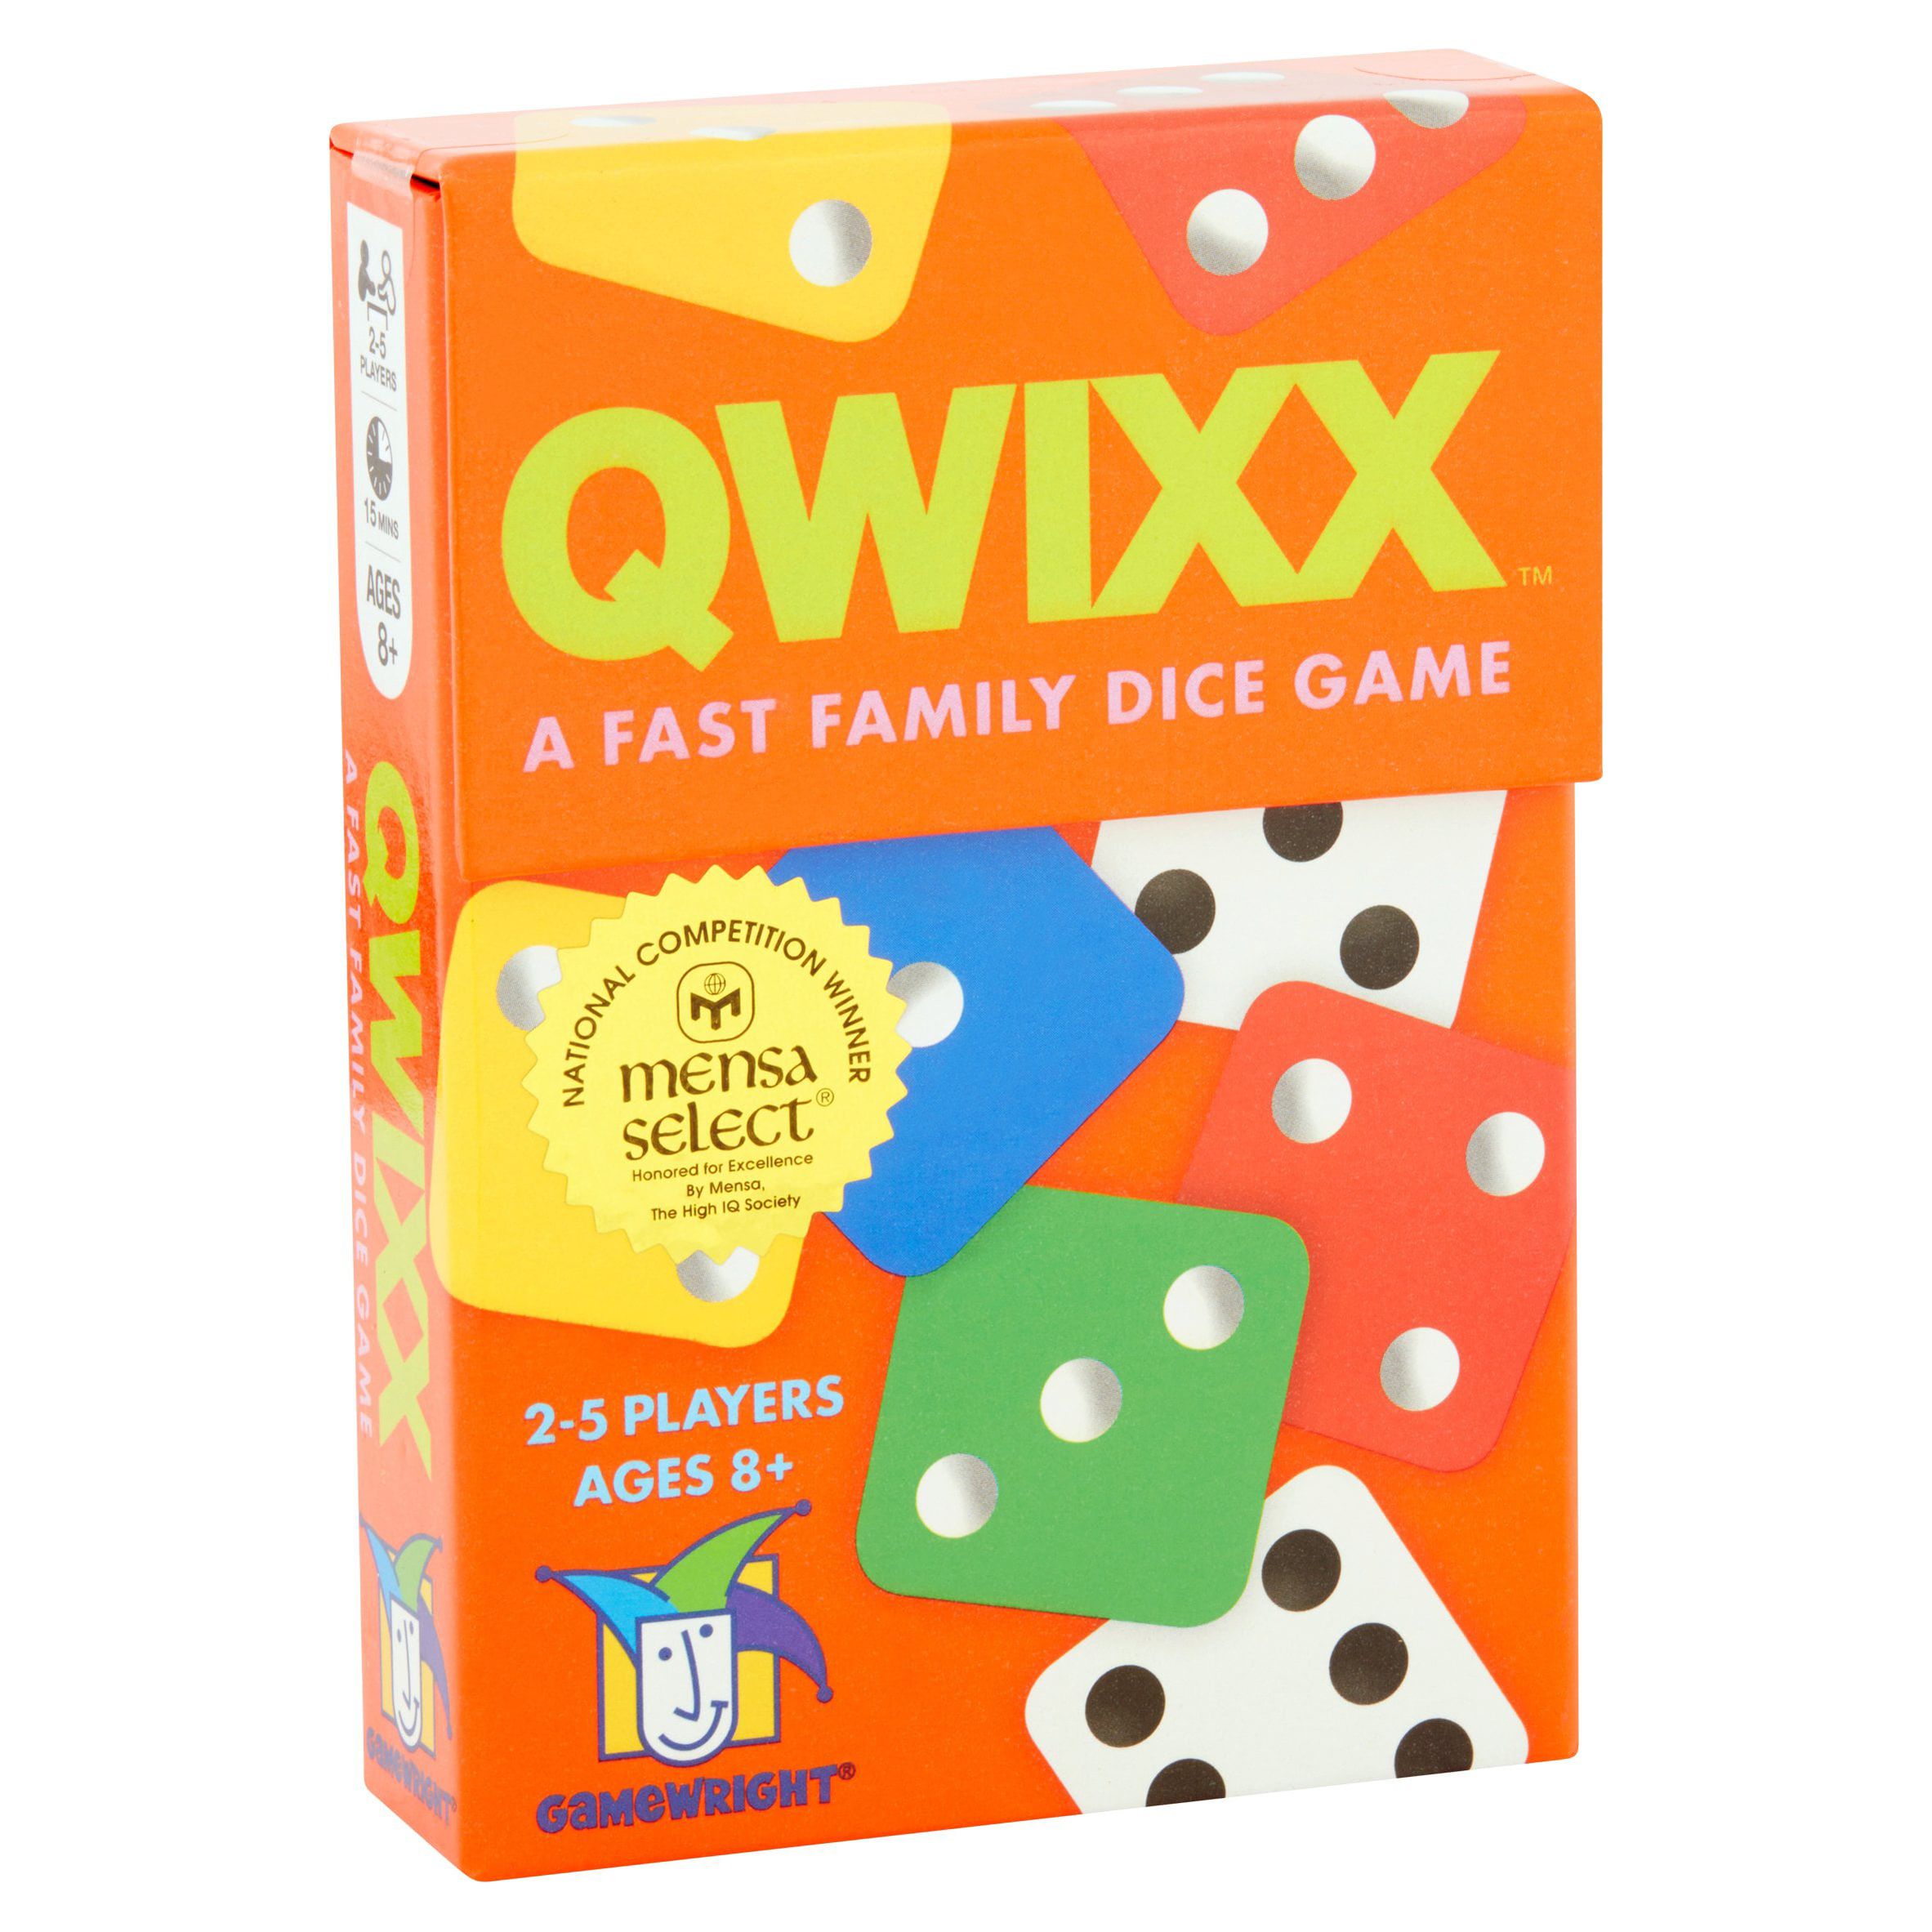 Gamewright Qwixx Dice Game Ages 8+ - image 2 of 5